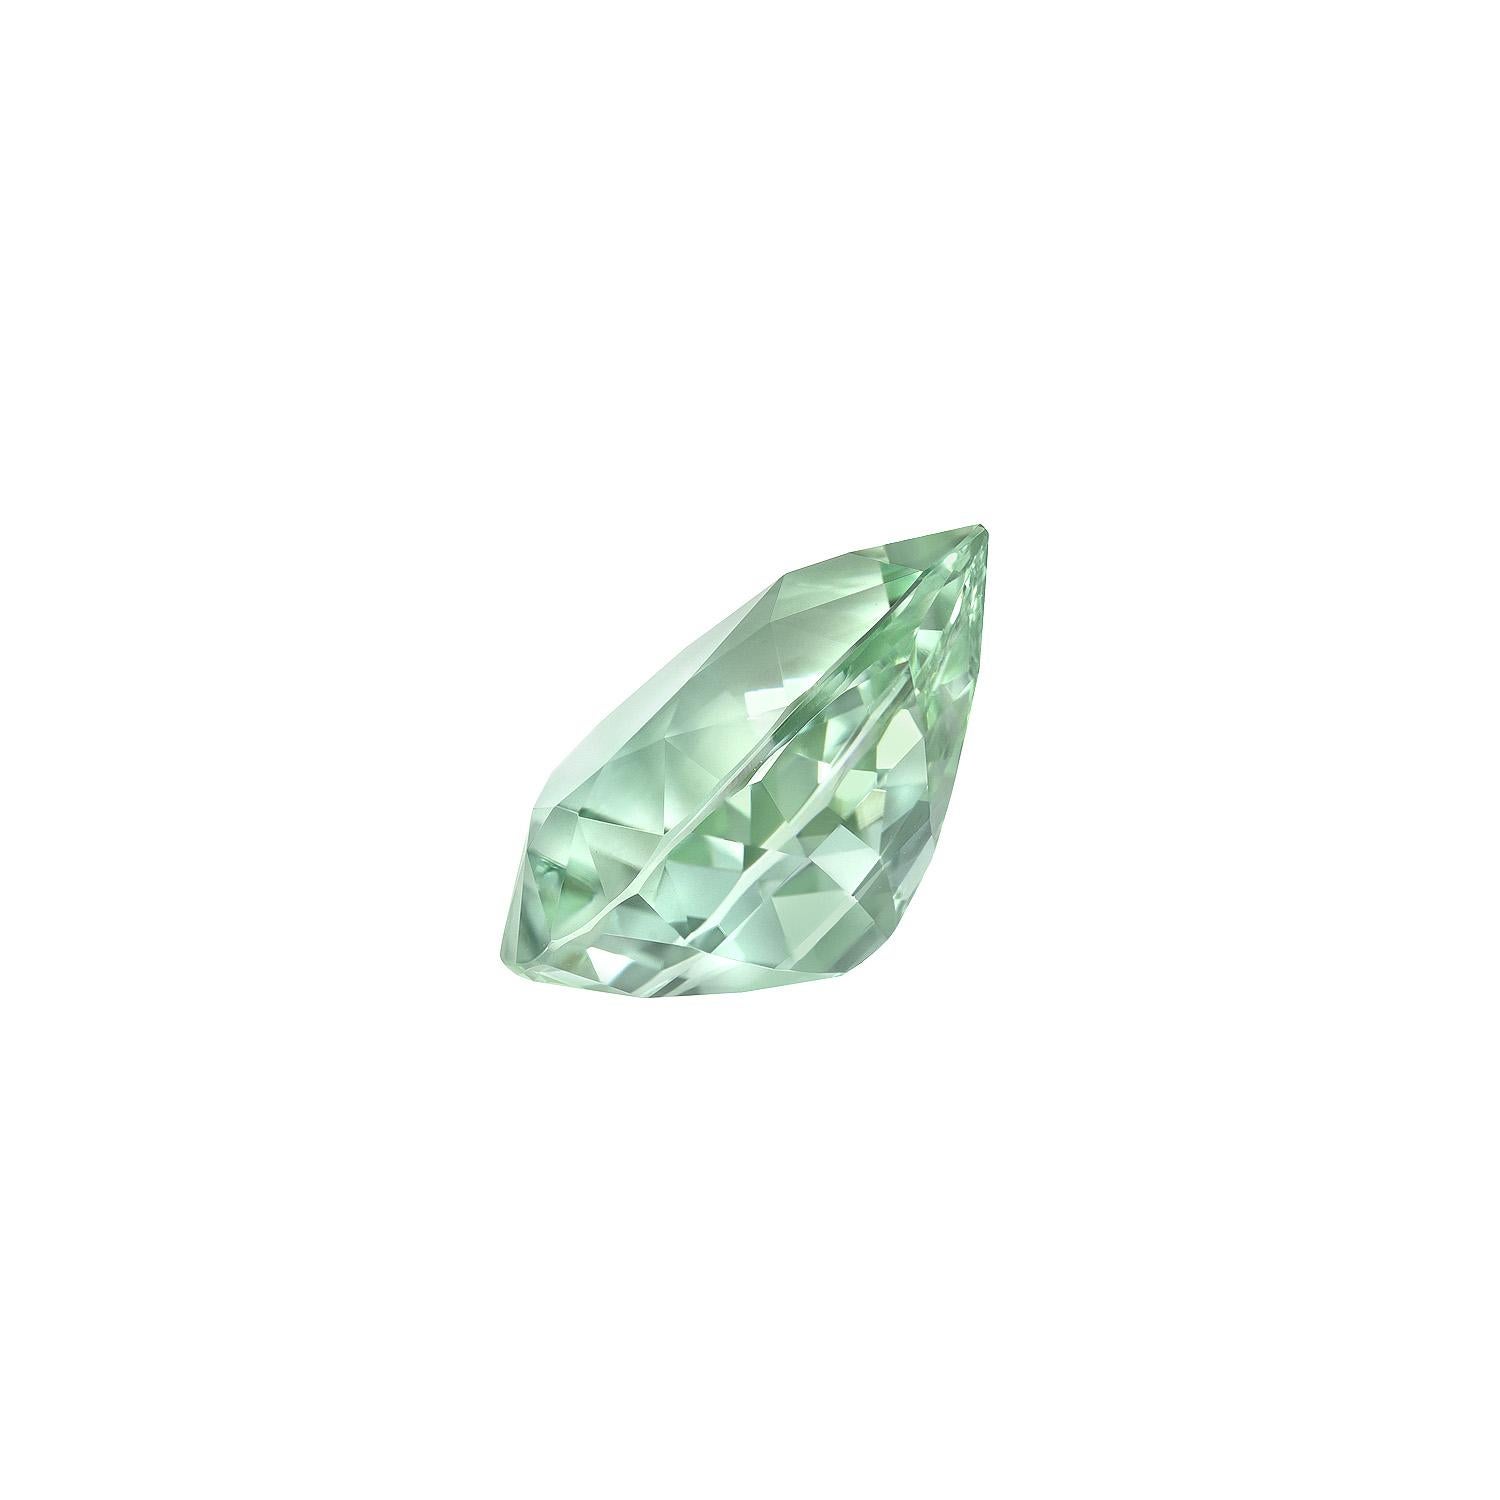 Breathtaking 4.96 carat Mint Green Tourmaline gem, offered loose to a fine gemstone collector.
Returns are accepted and paid by us within 7 days of delivery.
We offer supreme custom jewelry work upon request. Please contact us for more details.
For